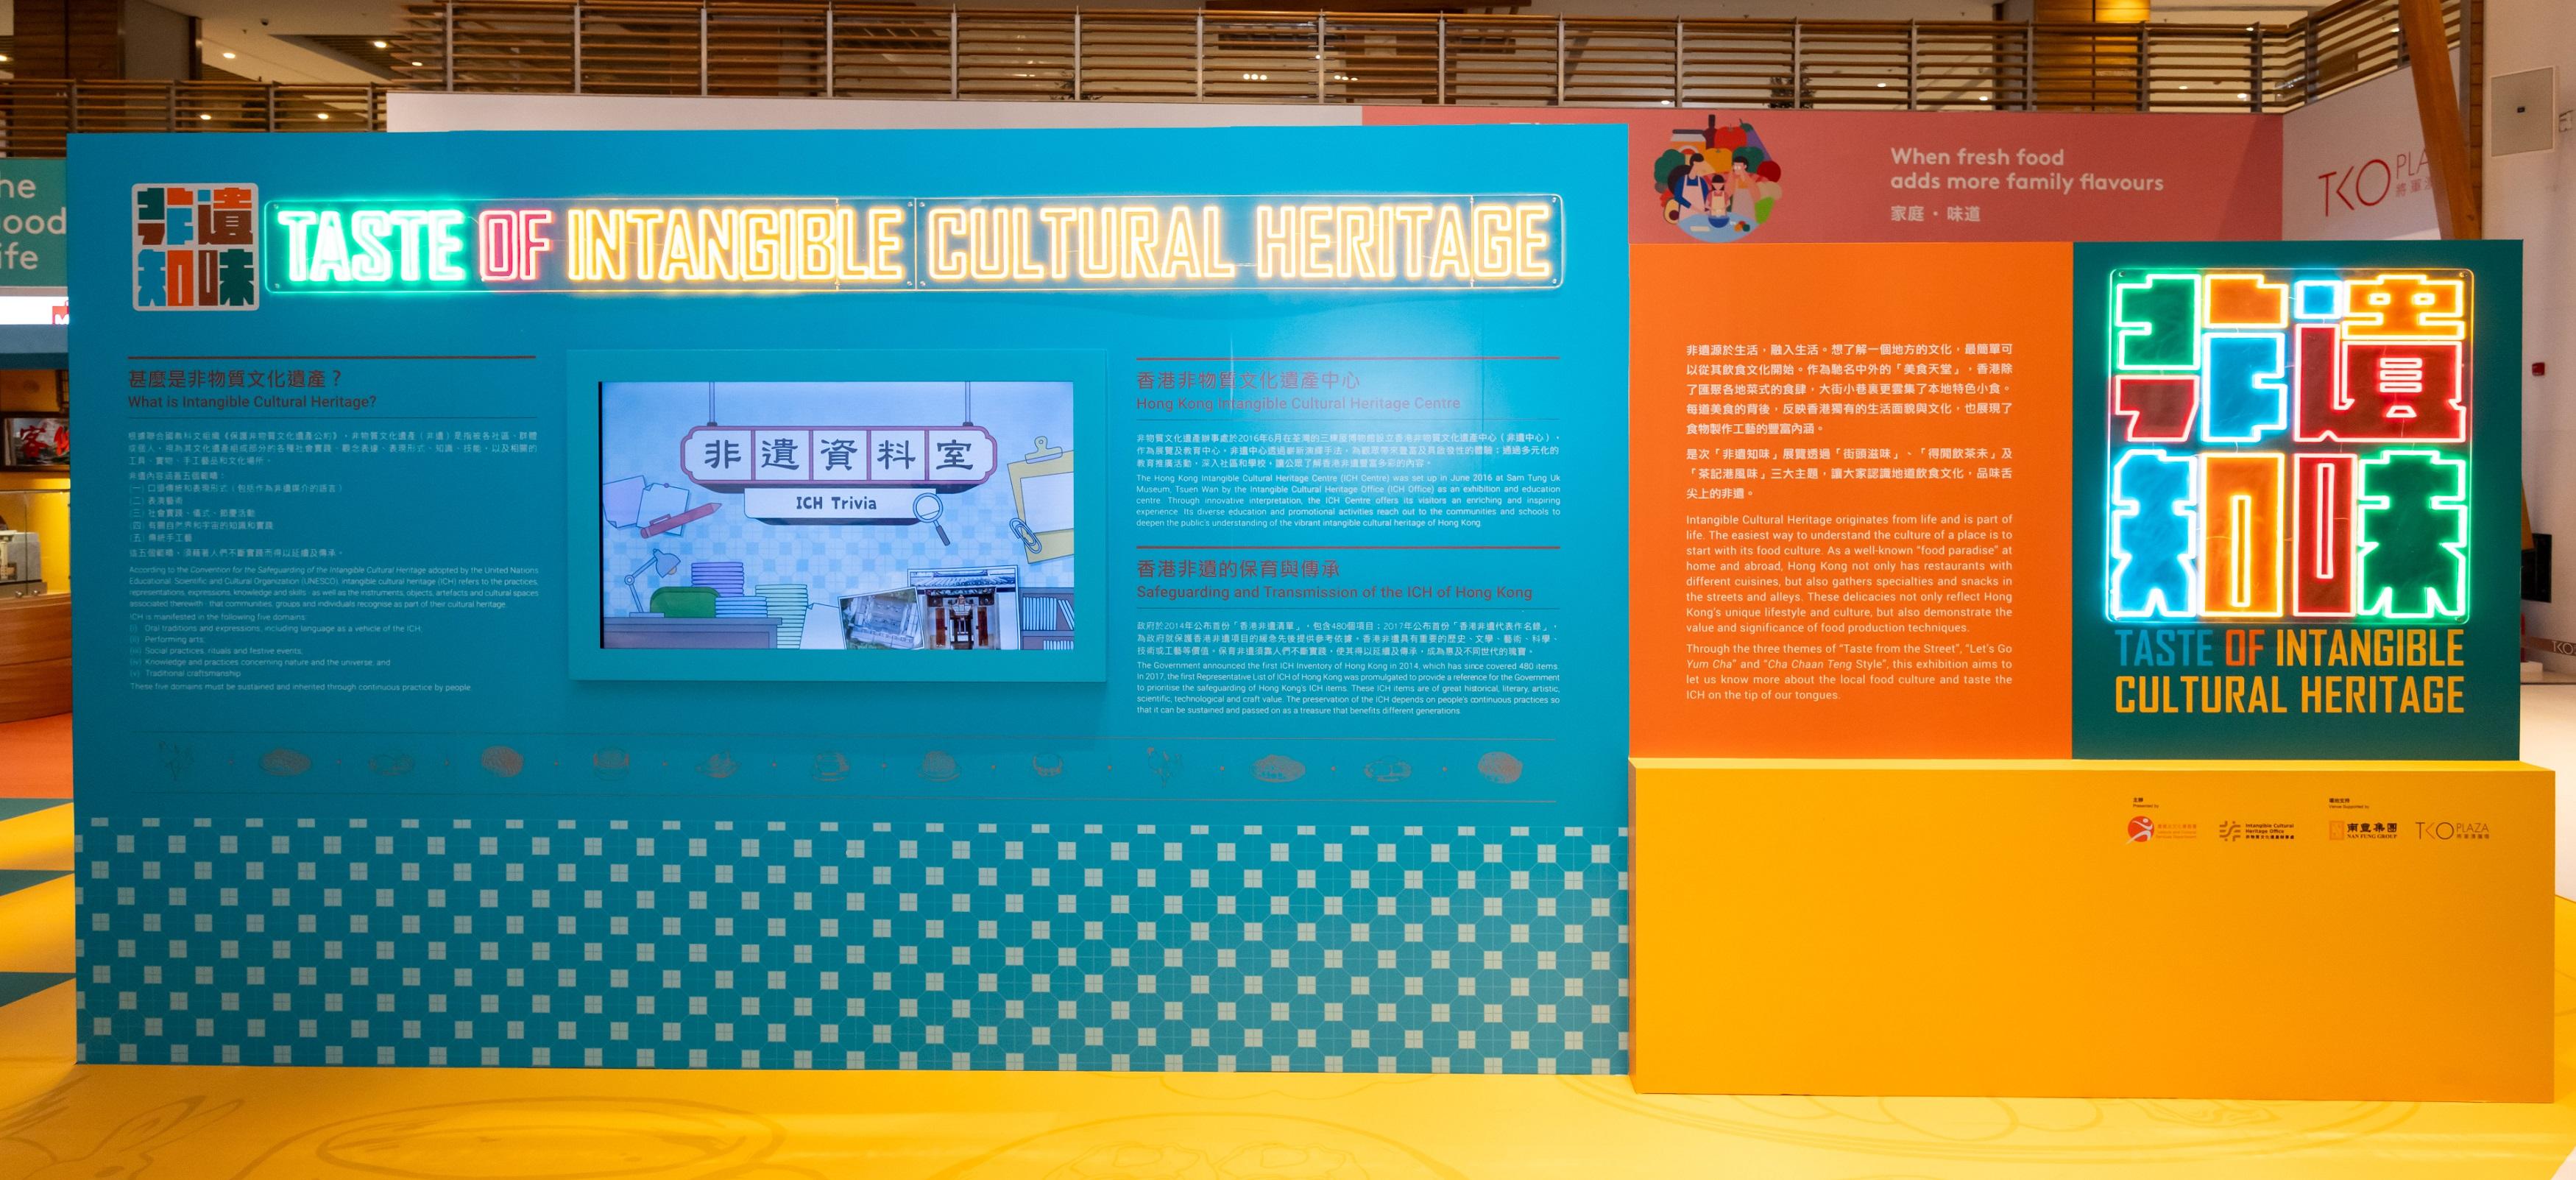 The Intangible Cultural Heritage (ICH) Office launched today (January 4) a roving exhibition titled "Taste of Intangible Cultural Heritage". With the theme of local food culture, the exhibition introduces nine ICH items about food and food utensils. 